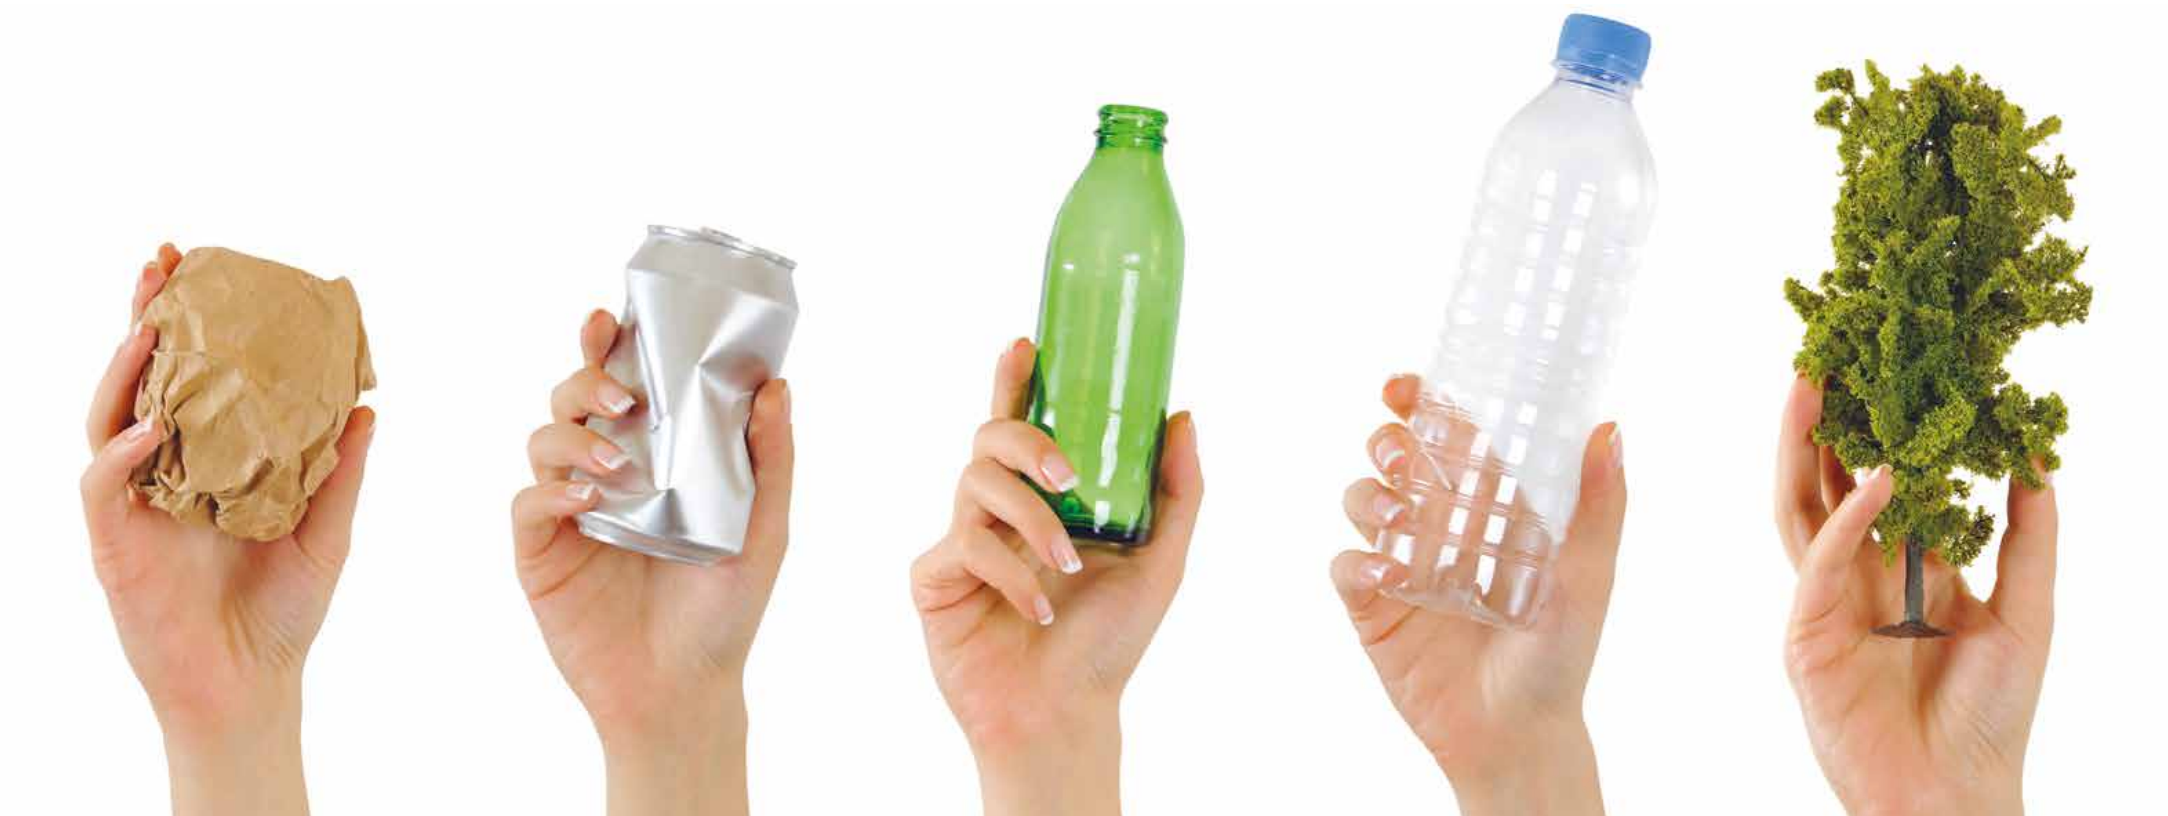 Virgin VS Recycled Plastics What Are The Advantages And Disadvantages